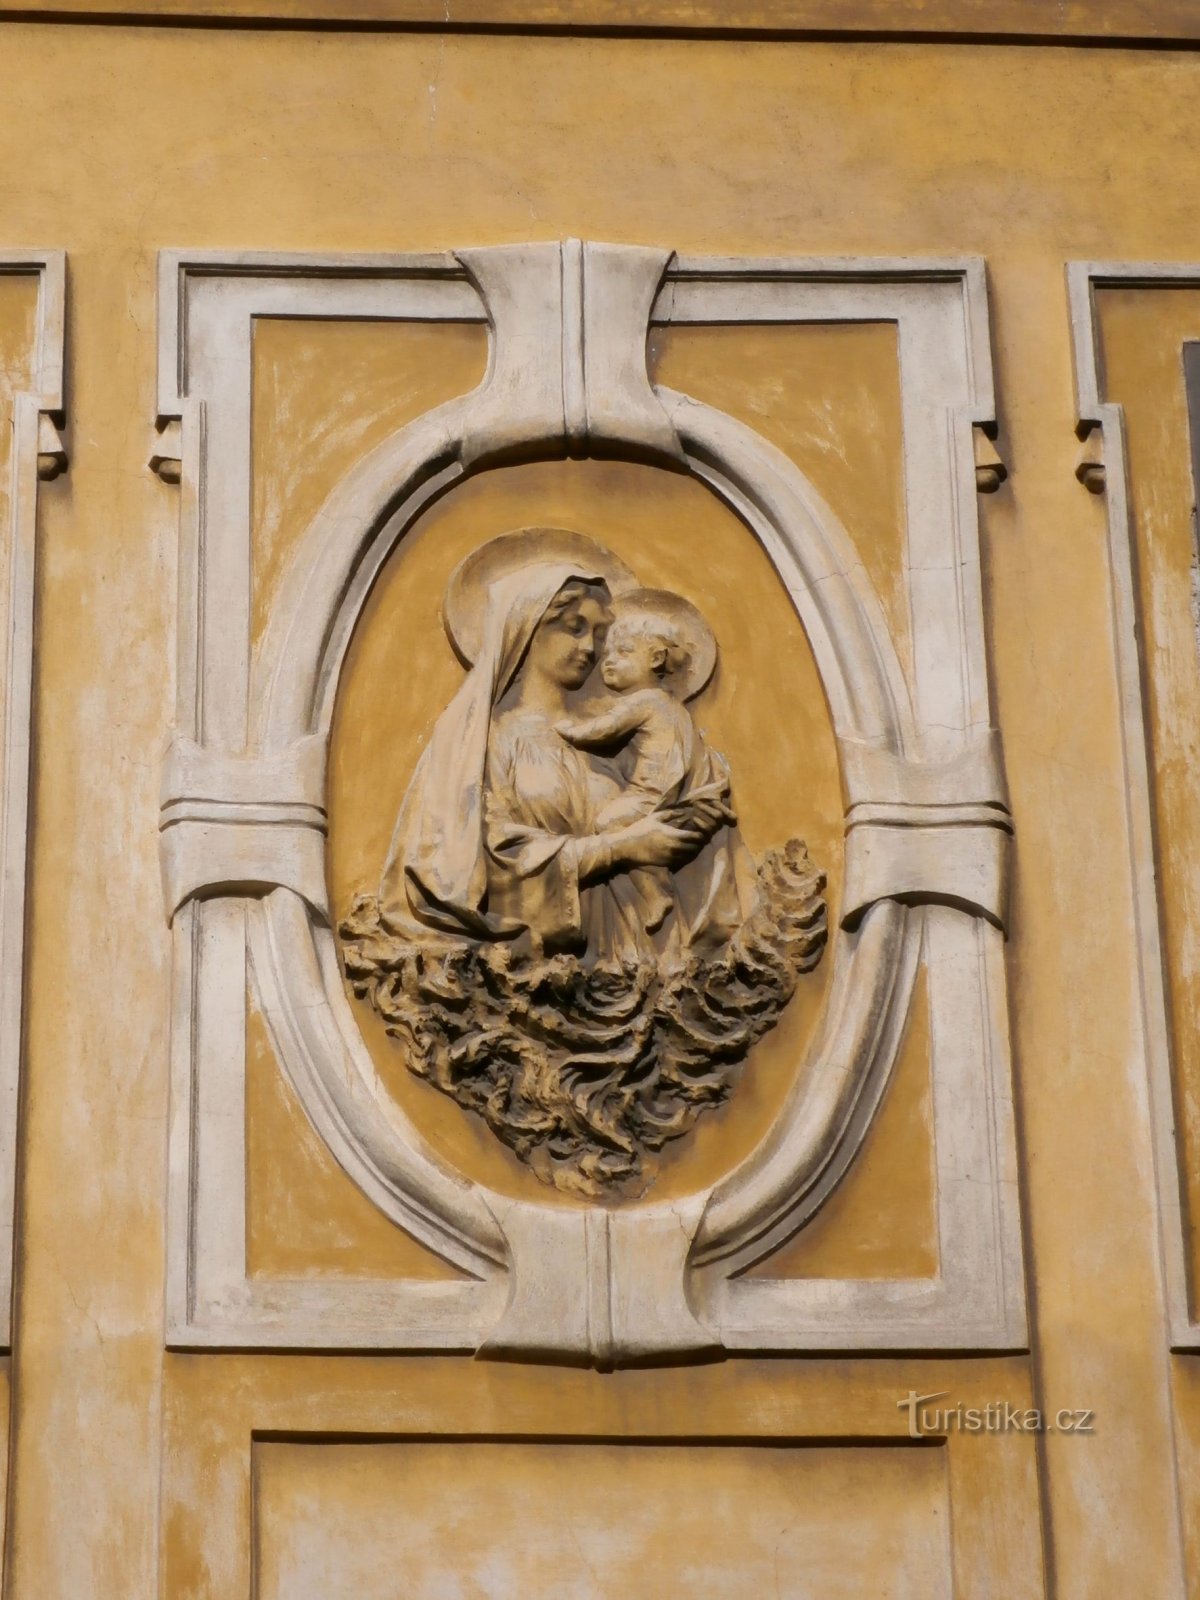 Relief of the Virgin Mary with the Baby Jesus on No. 59 (Hradec Králové, 2.8.2014 August XNUMX)